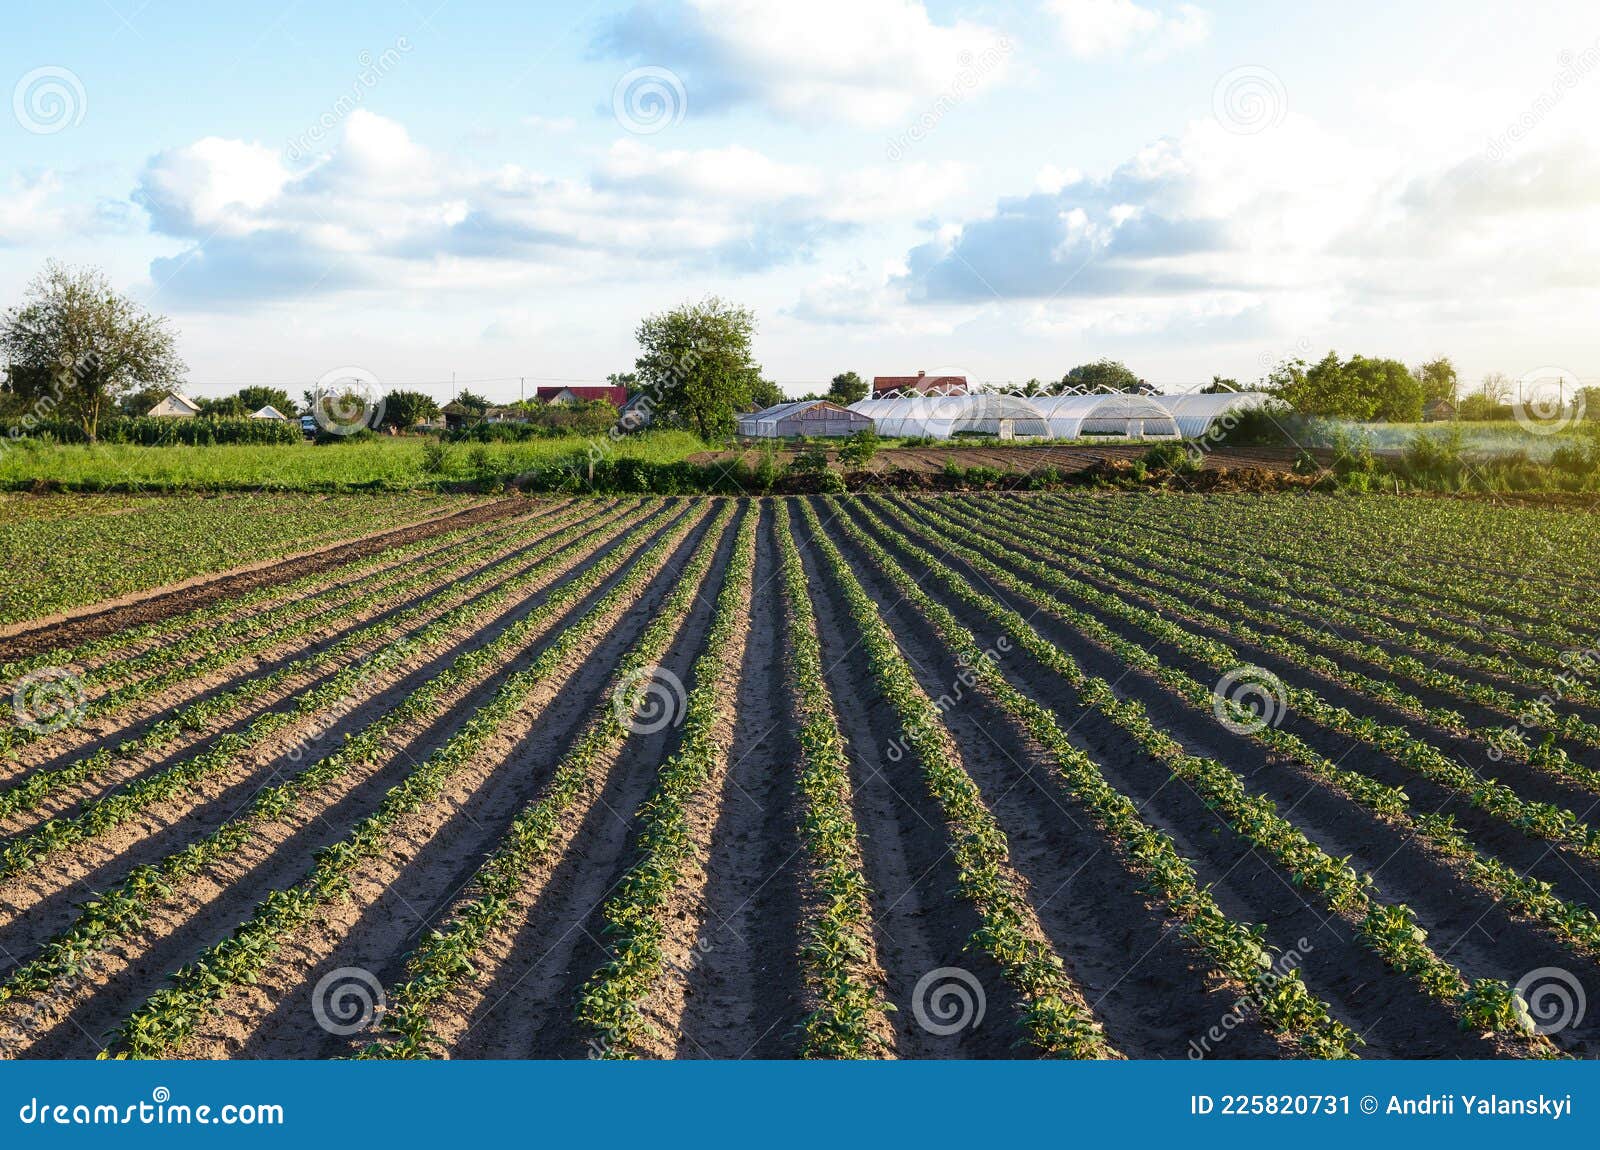 beautiful view of the farm field and greenhouse on background of village. rows of potato bushes. agroindustry and agribusiness